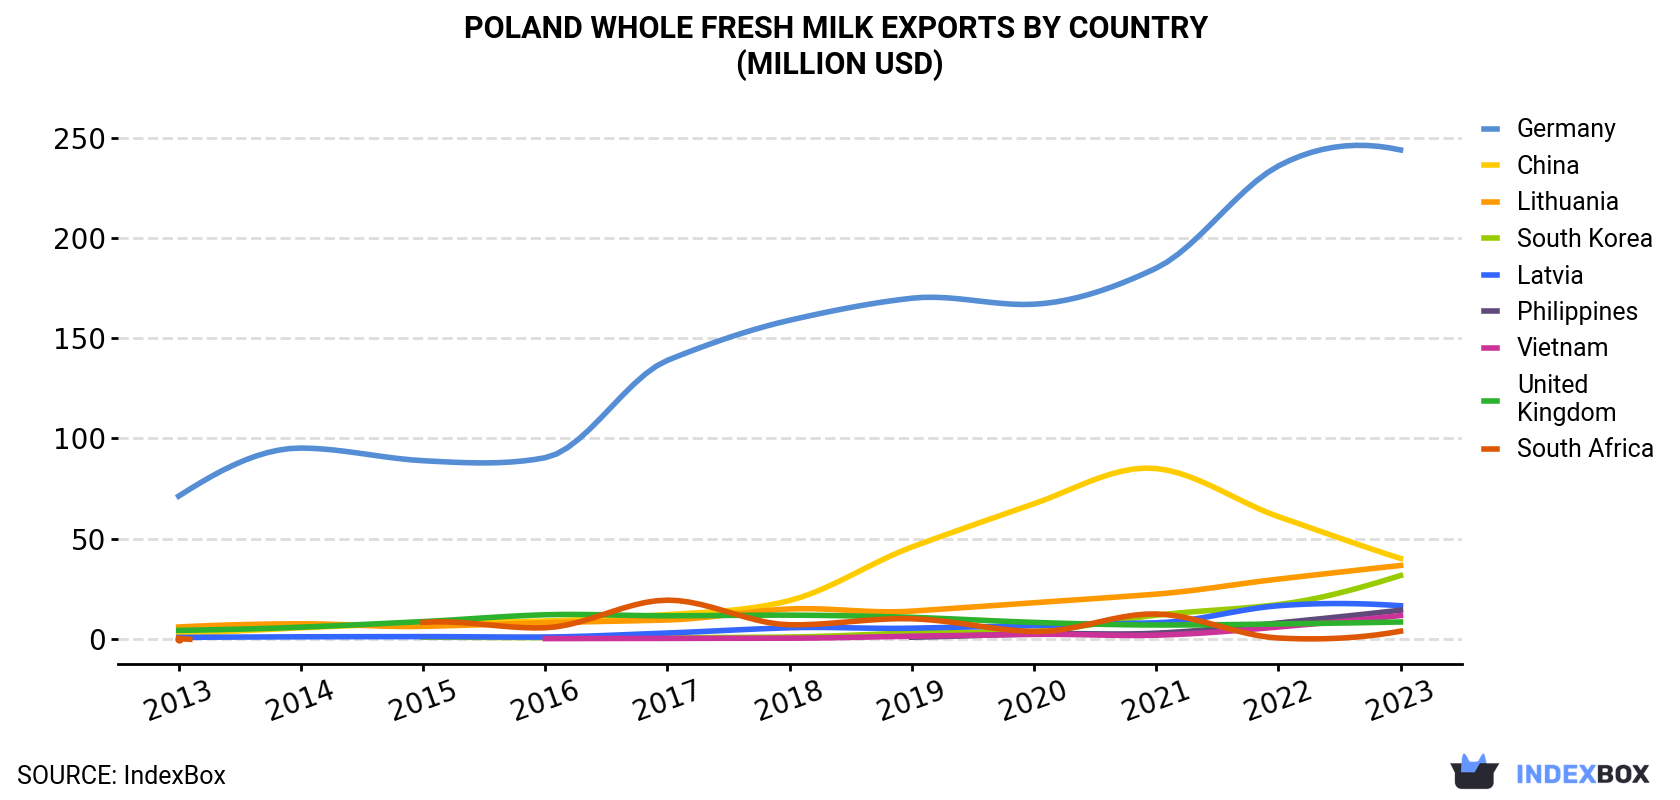 Poland Whole Fresh Milk Exports By Country (Million USD)